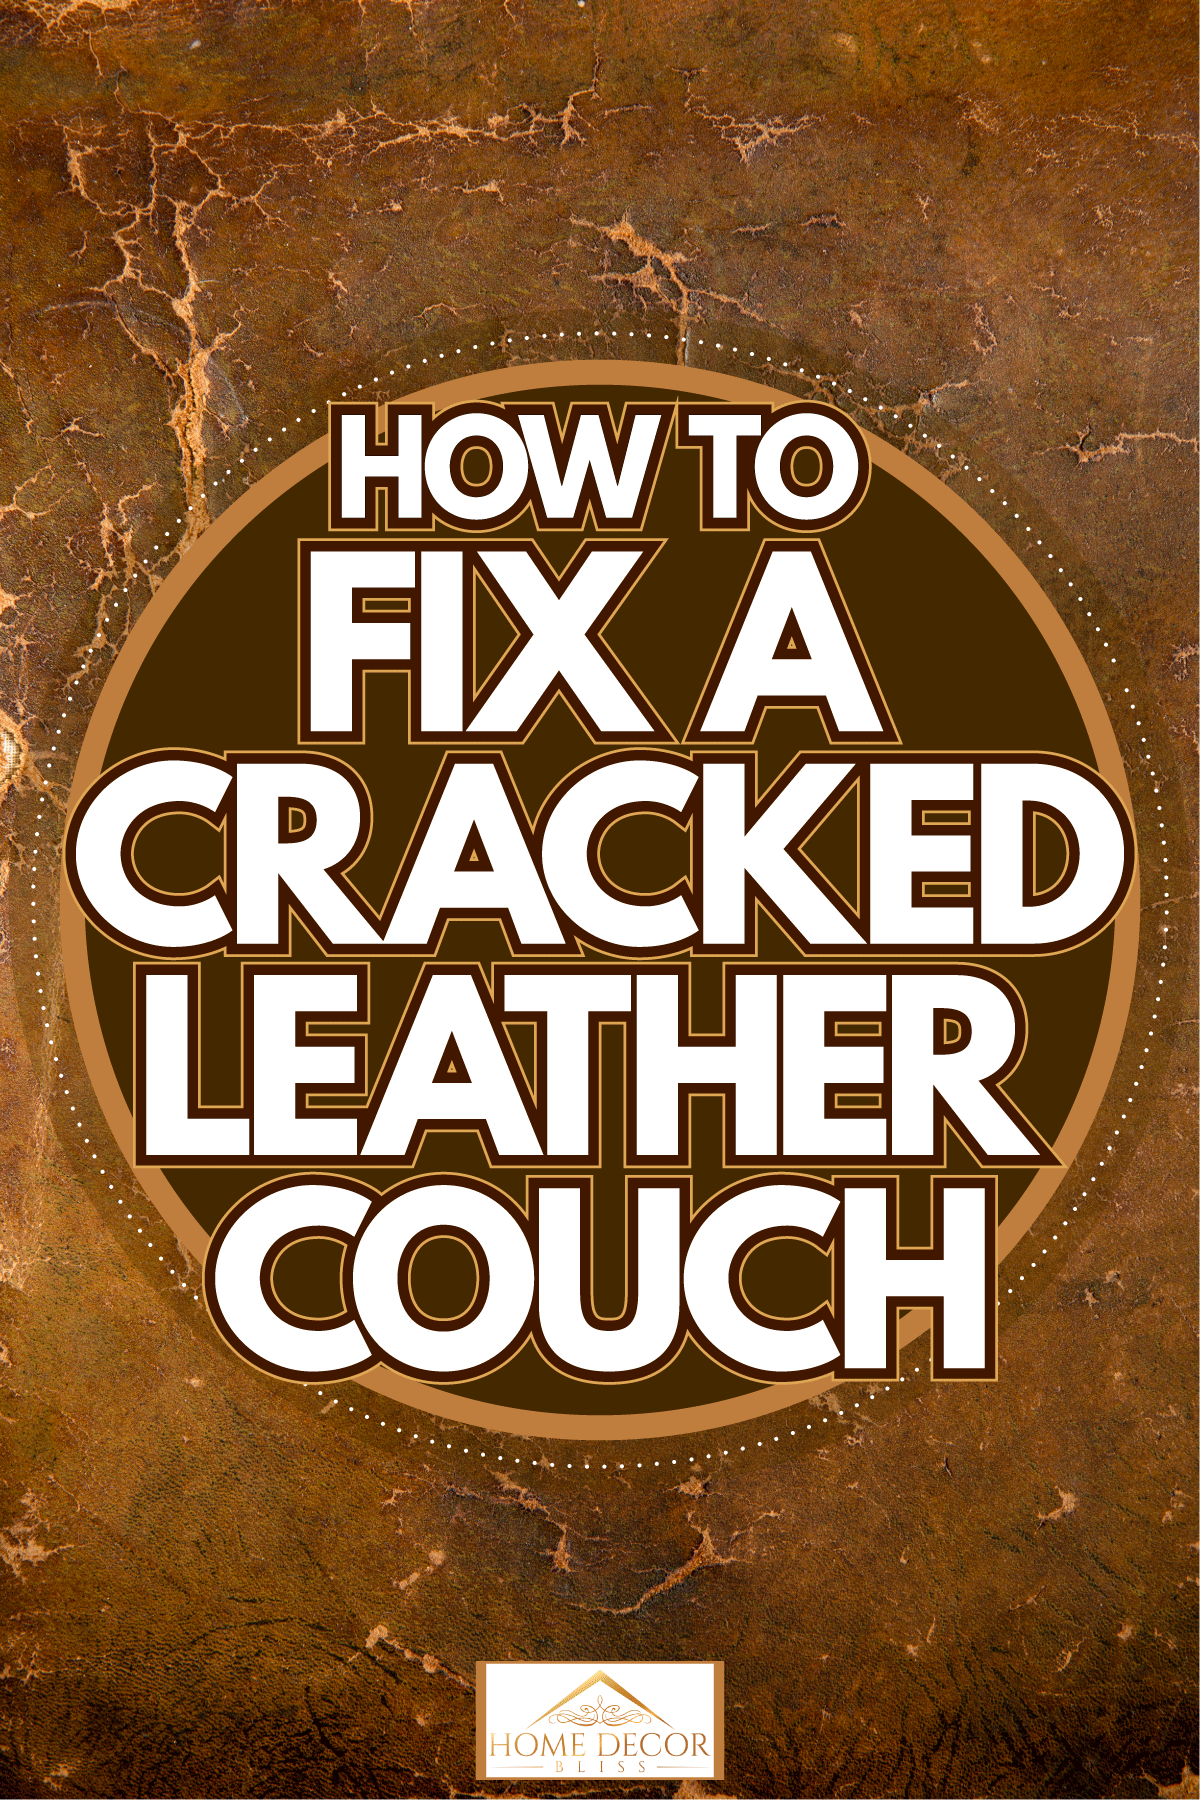 Cracks on a leather photographed in detail, How To Fix A Cracked Leather Couch